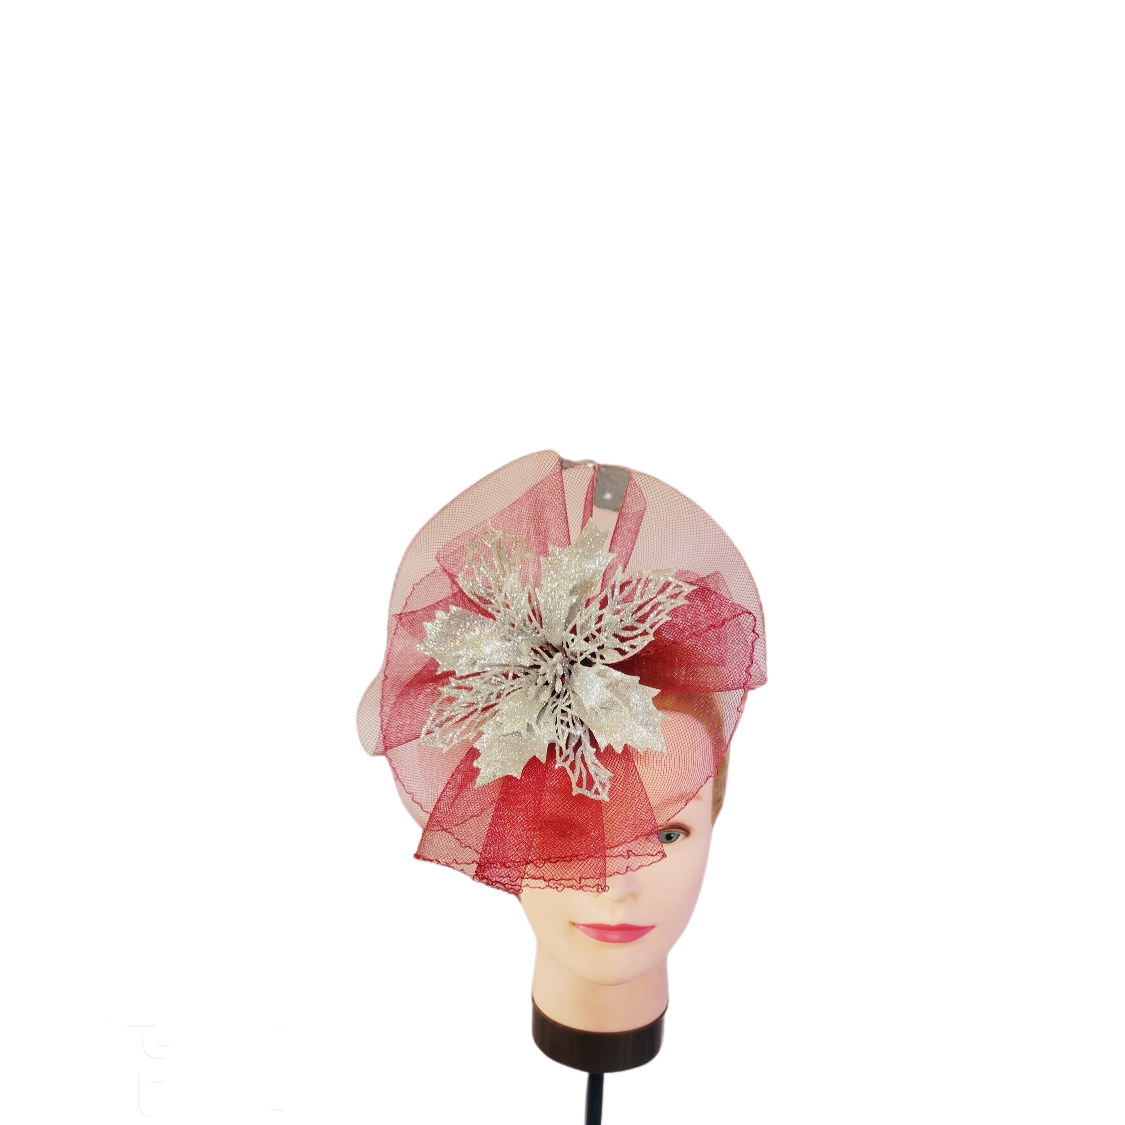 Women's/Girl's Fascinators Hat Flower Feather Veil Headband Tea Party Church Wedding Cocktail Headwear with Clip/band Color: Wine and Silver